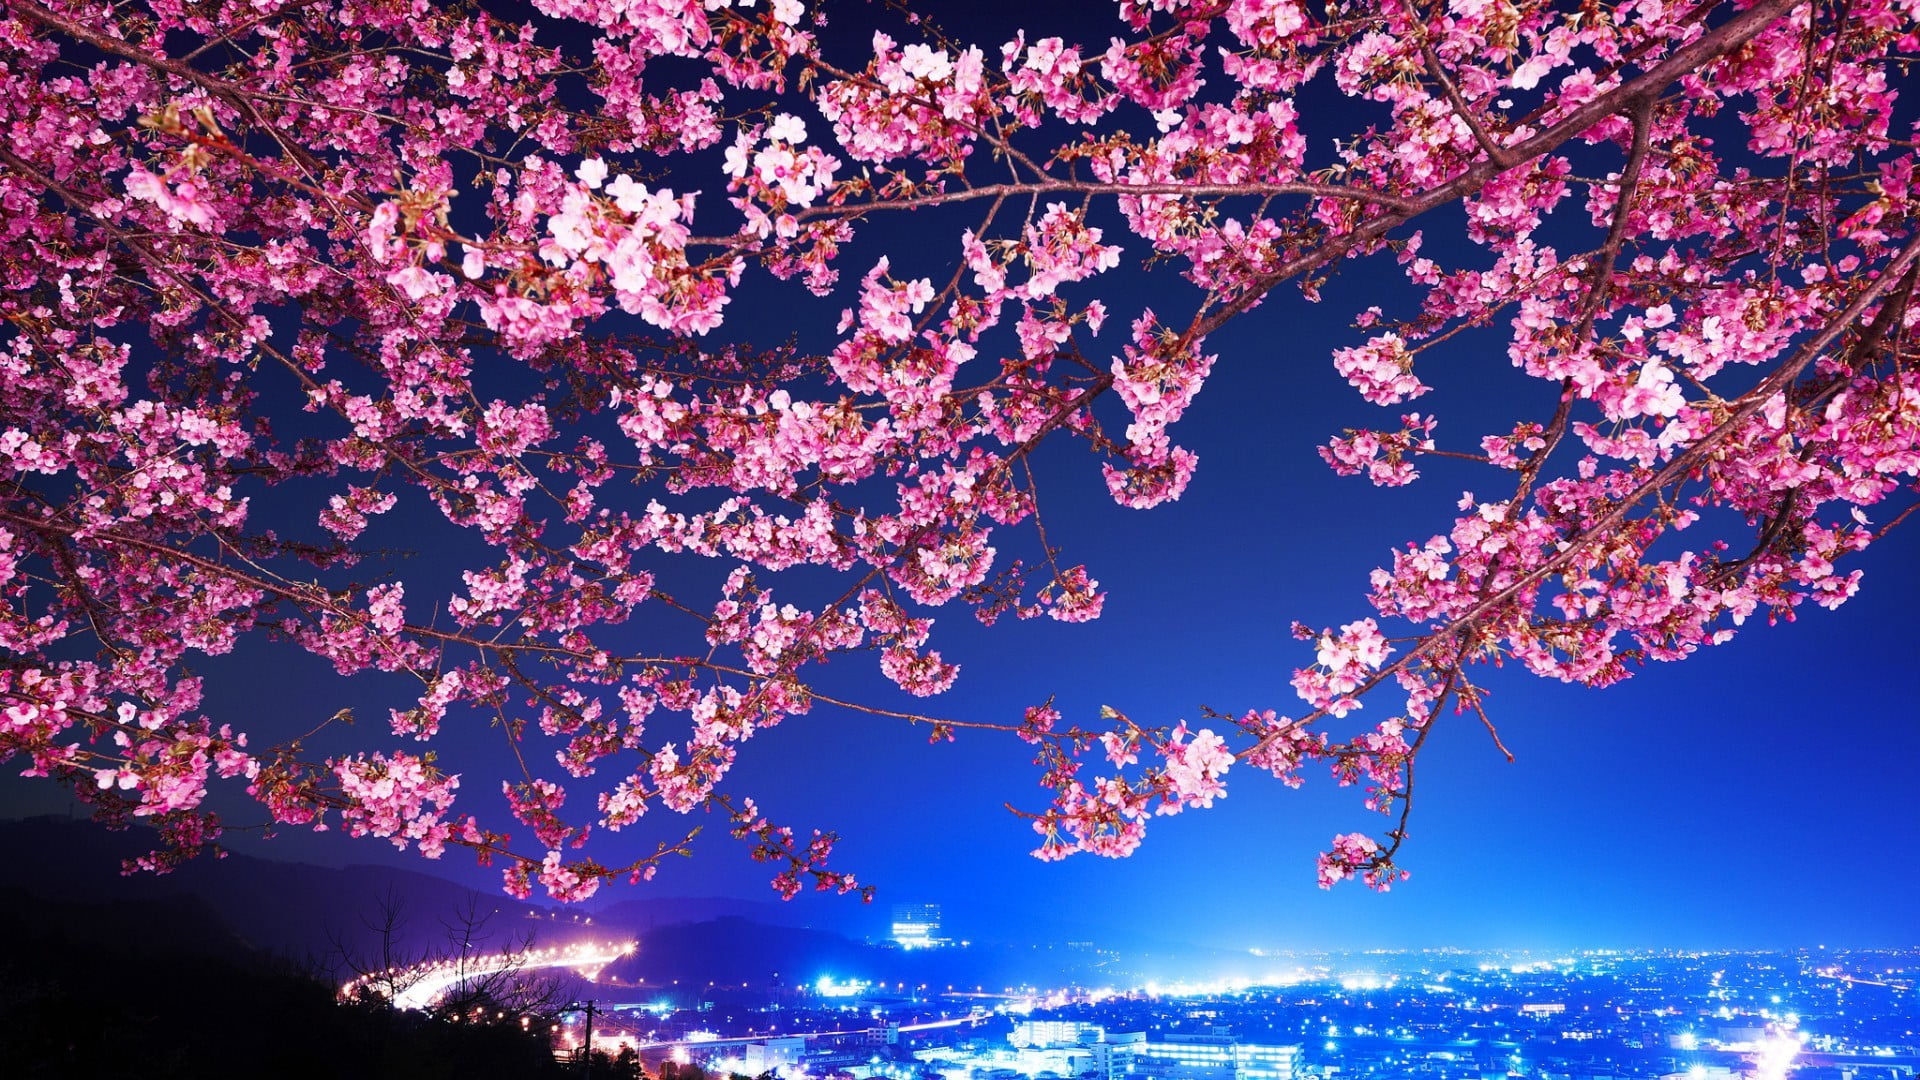 Online Crop Photo Of Pink Cherry Blossom Tree Hd Wallpaper